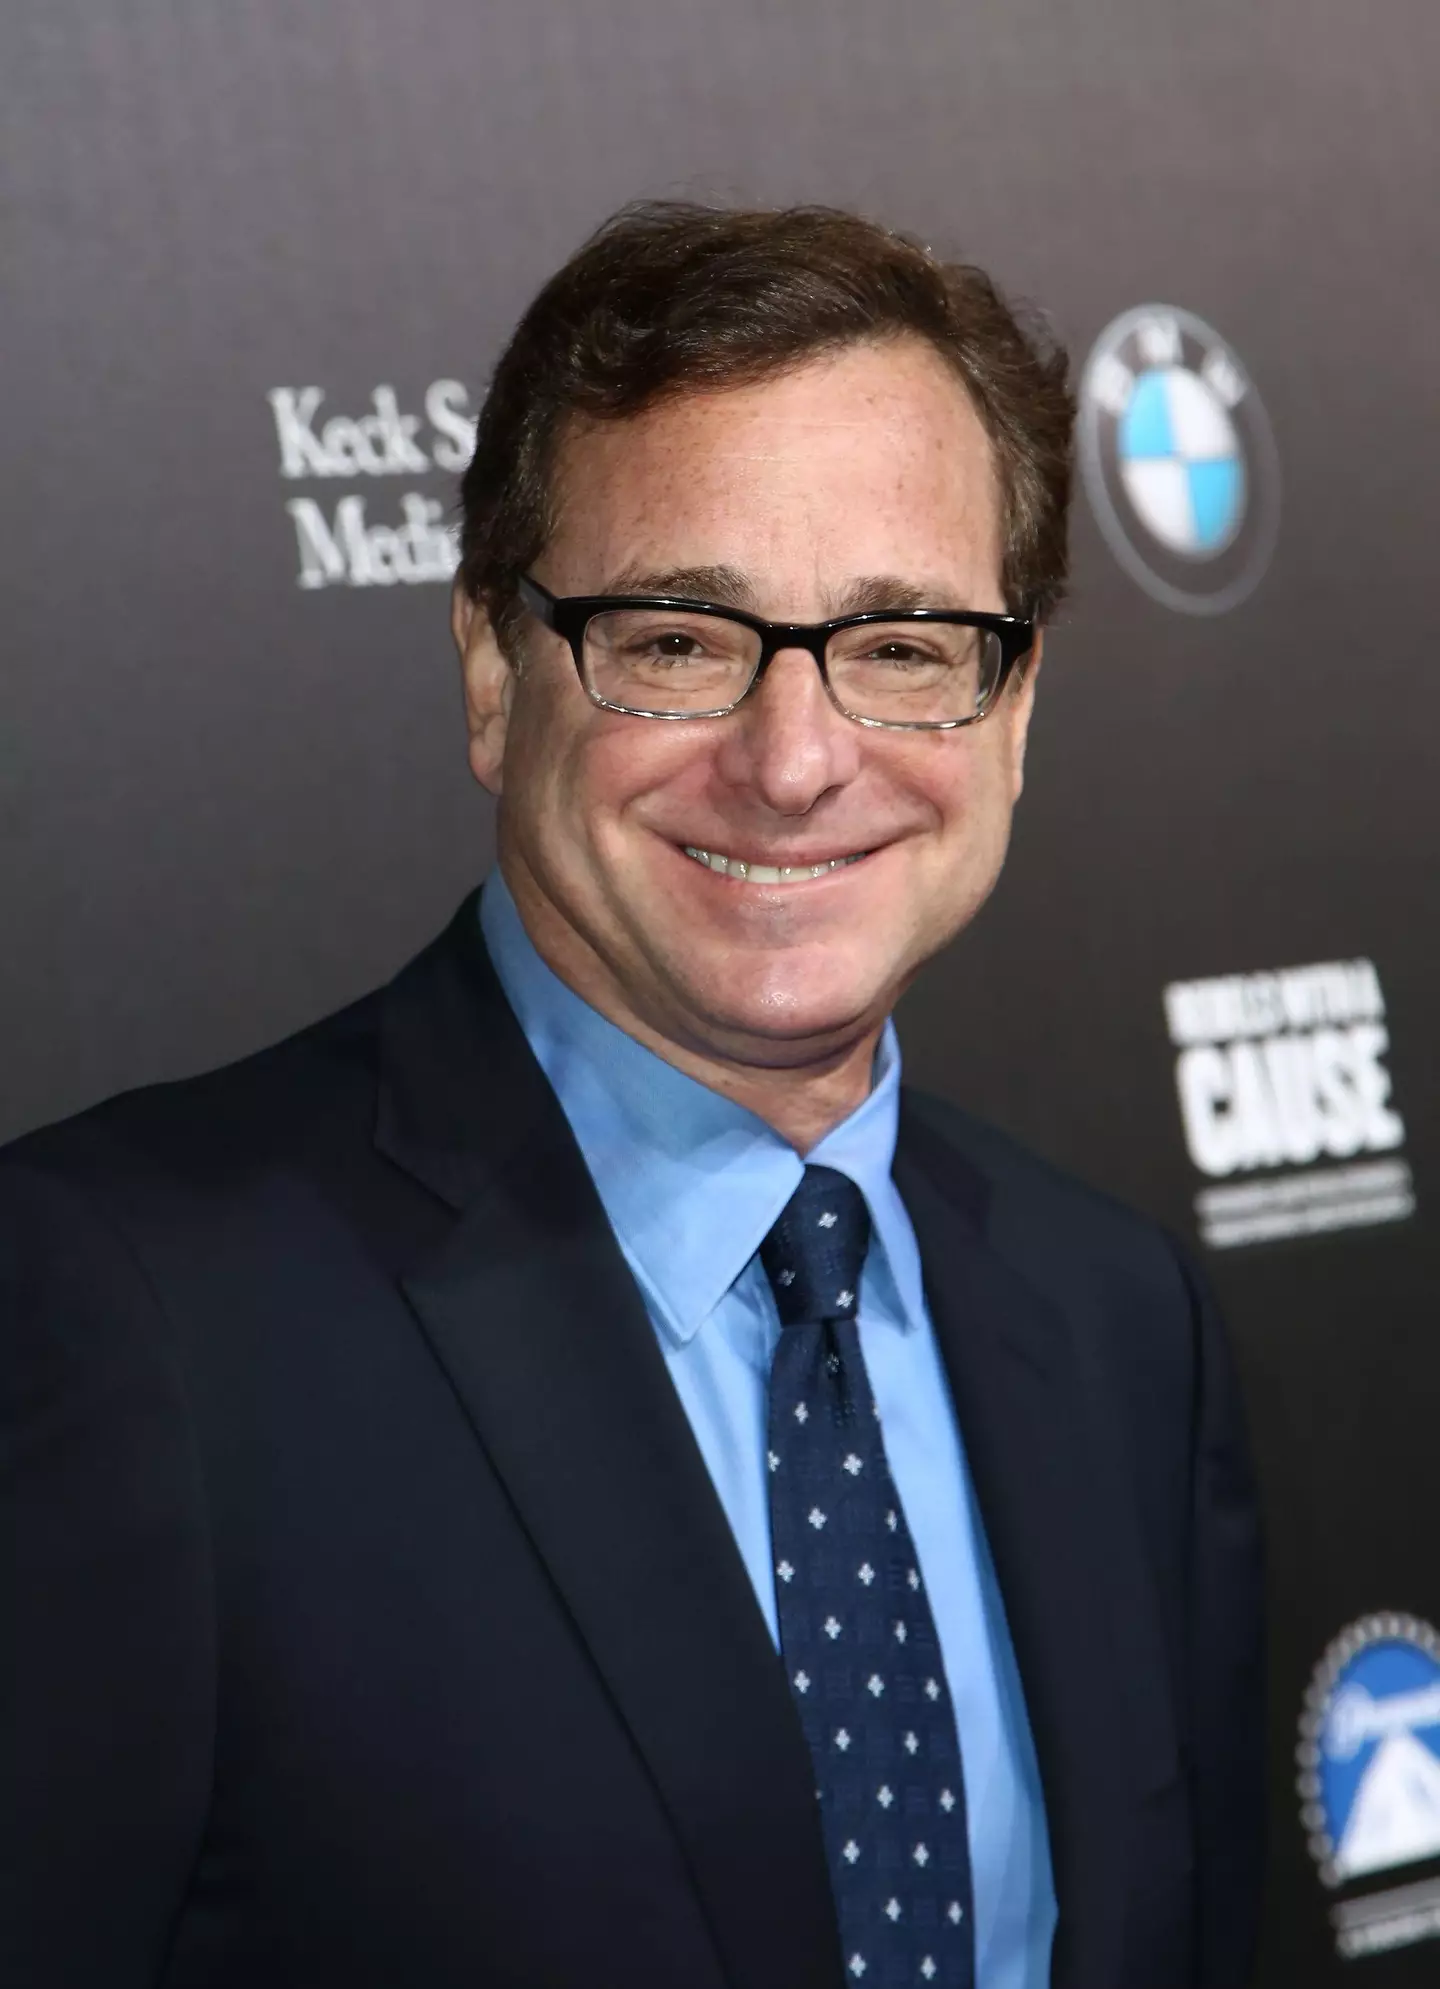 Saget is believed to have died following an accidental blow to the head, his family have said.